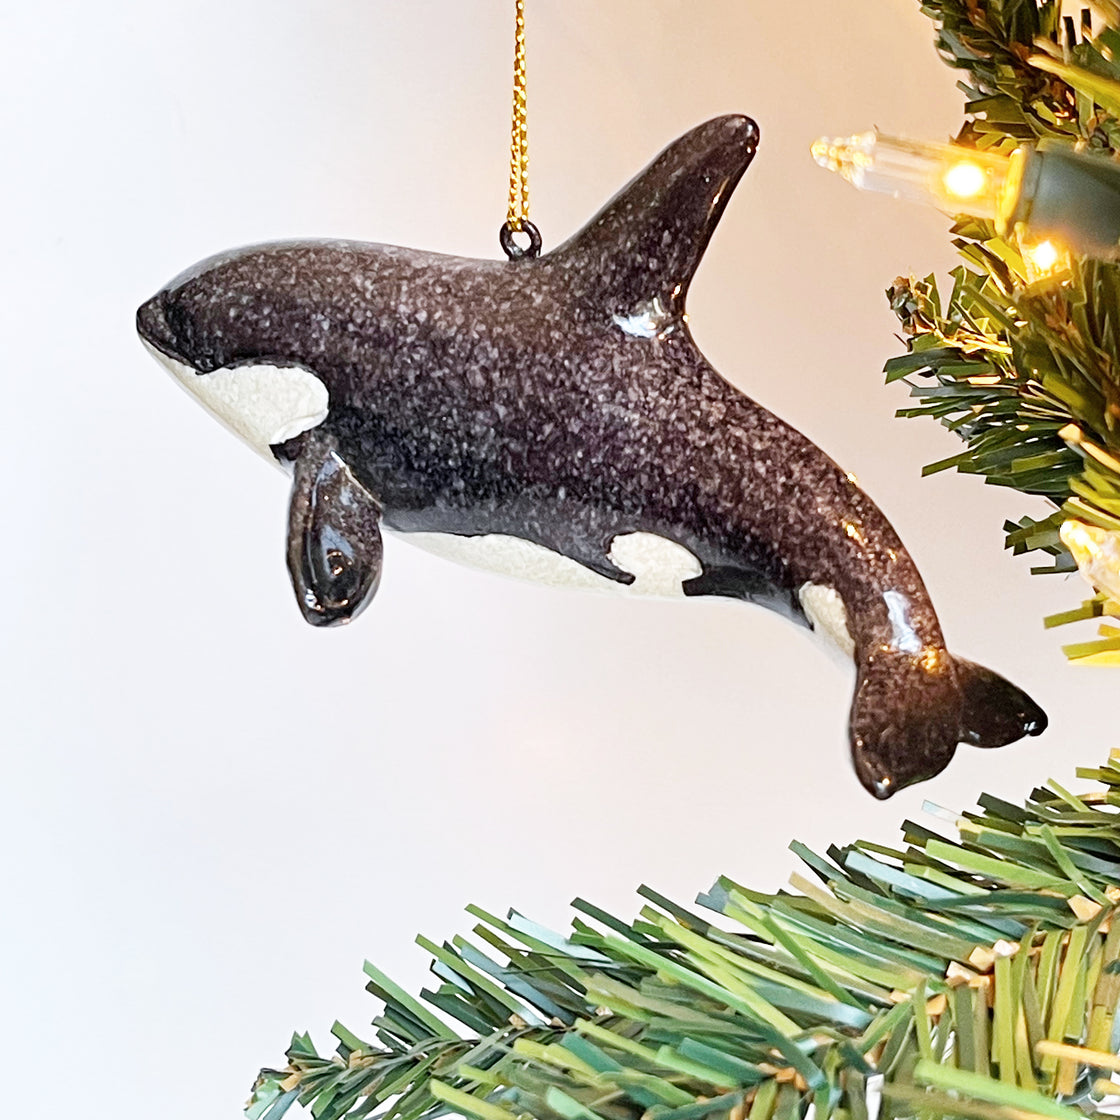 ornament featuring a hand-painted Orca Killer Whale hanging on a tree illuminated by Christmas light